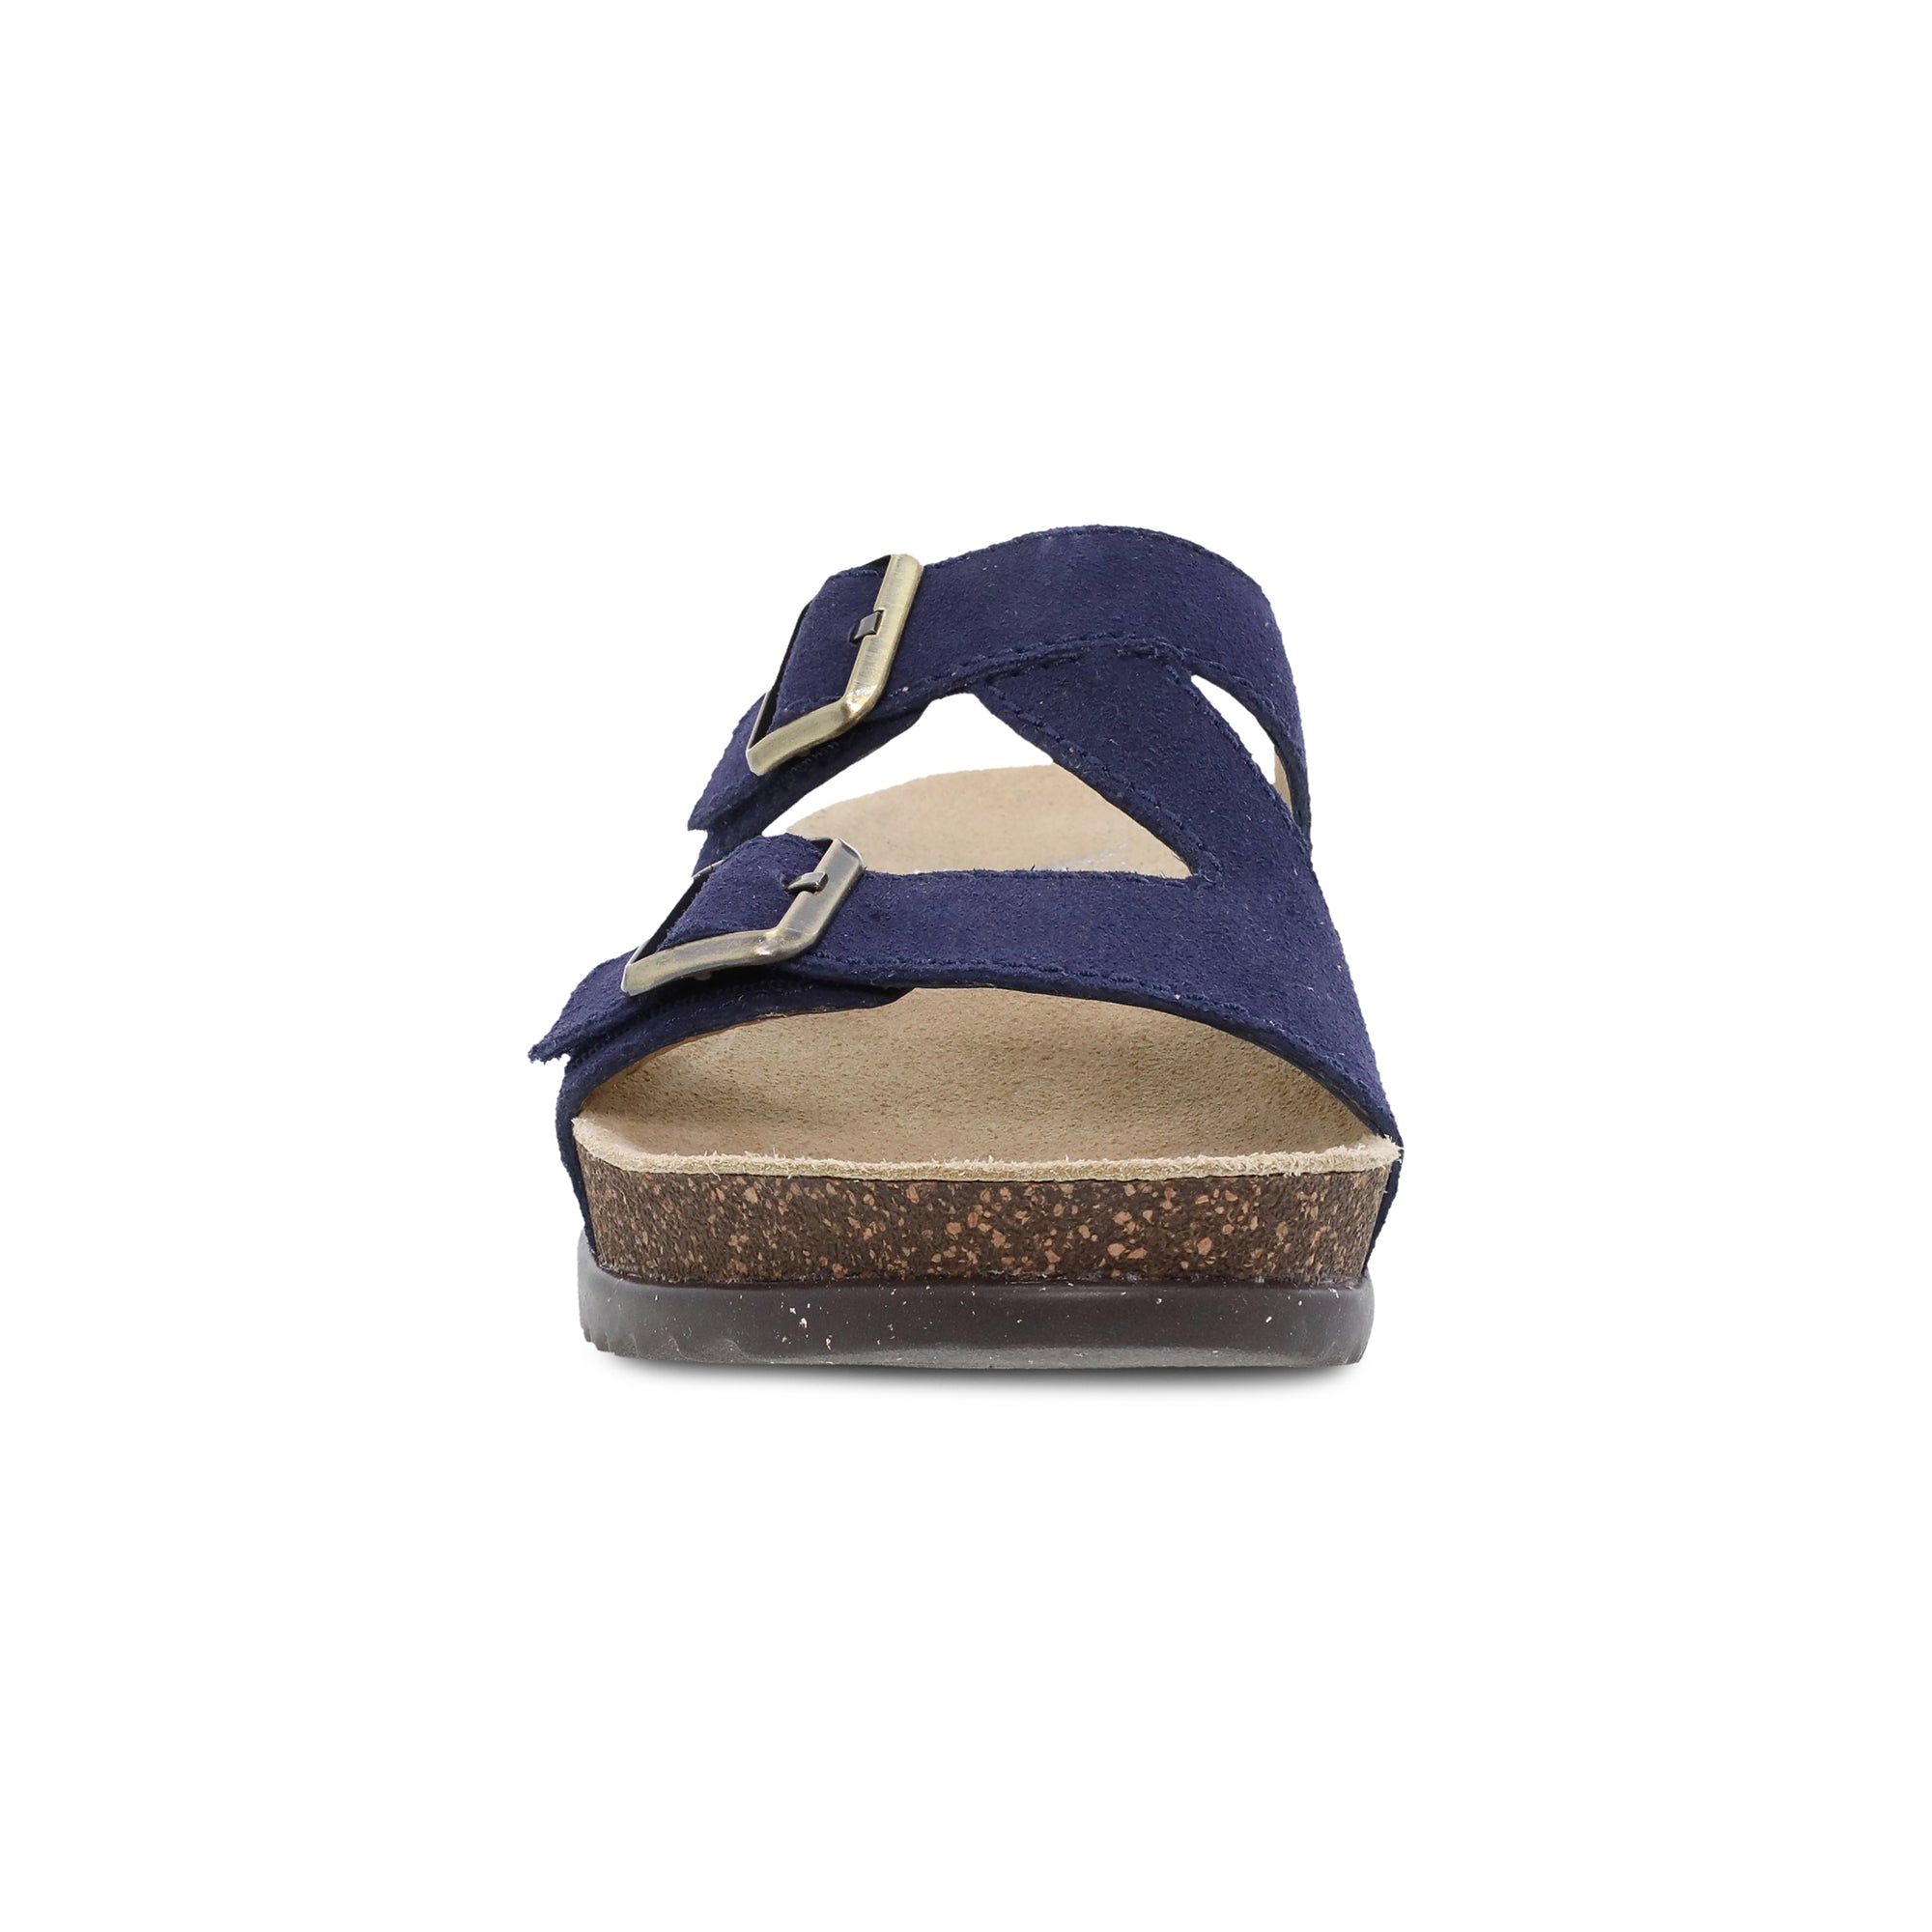 Toe image of Dayna Navy Suede